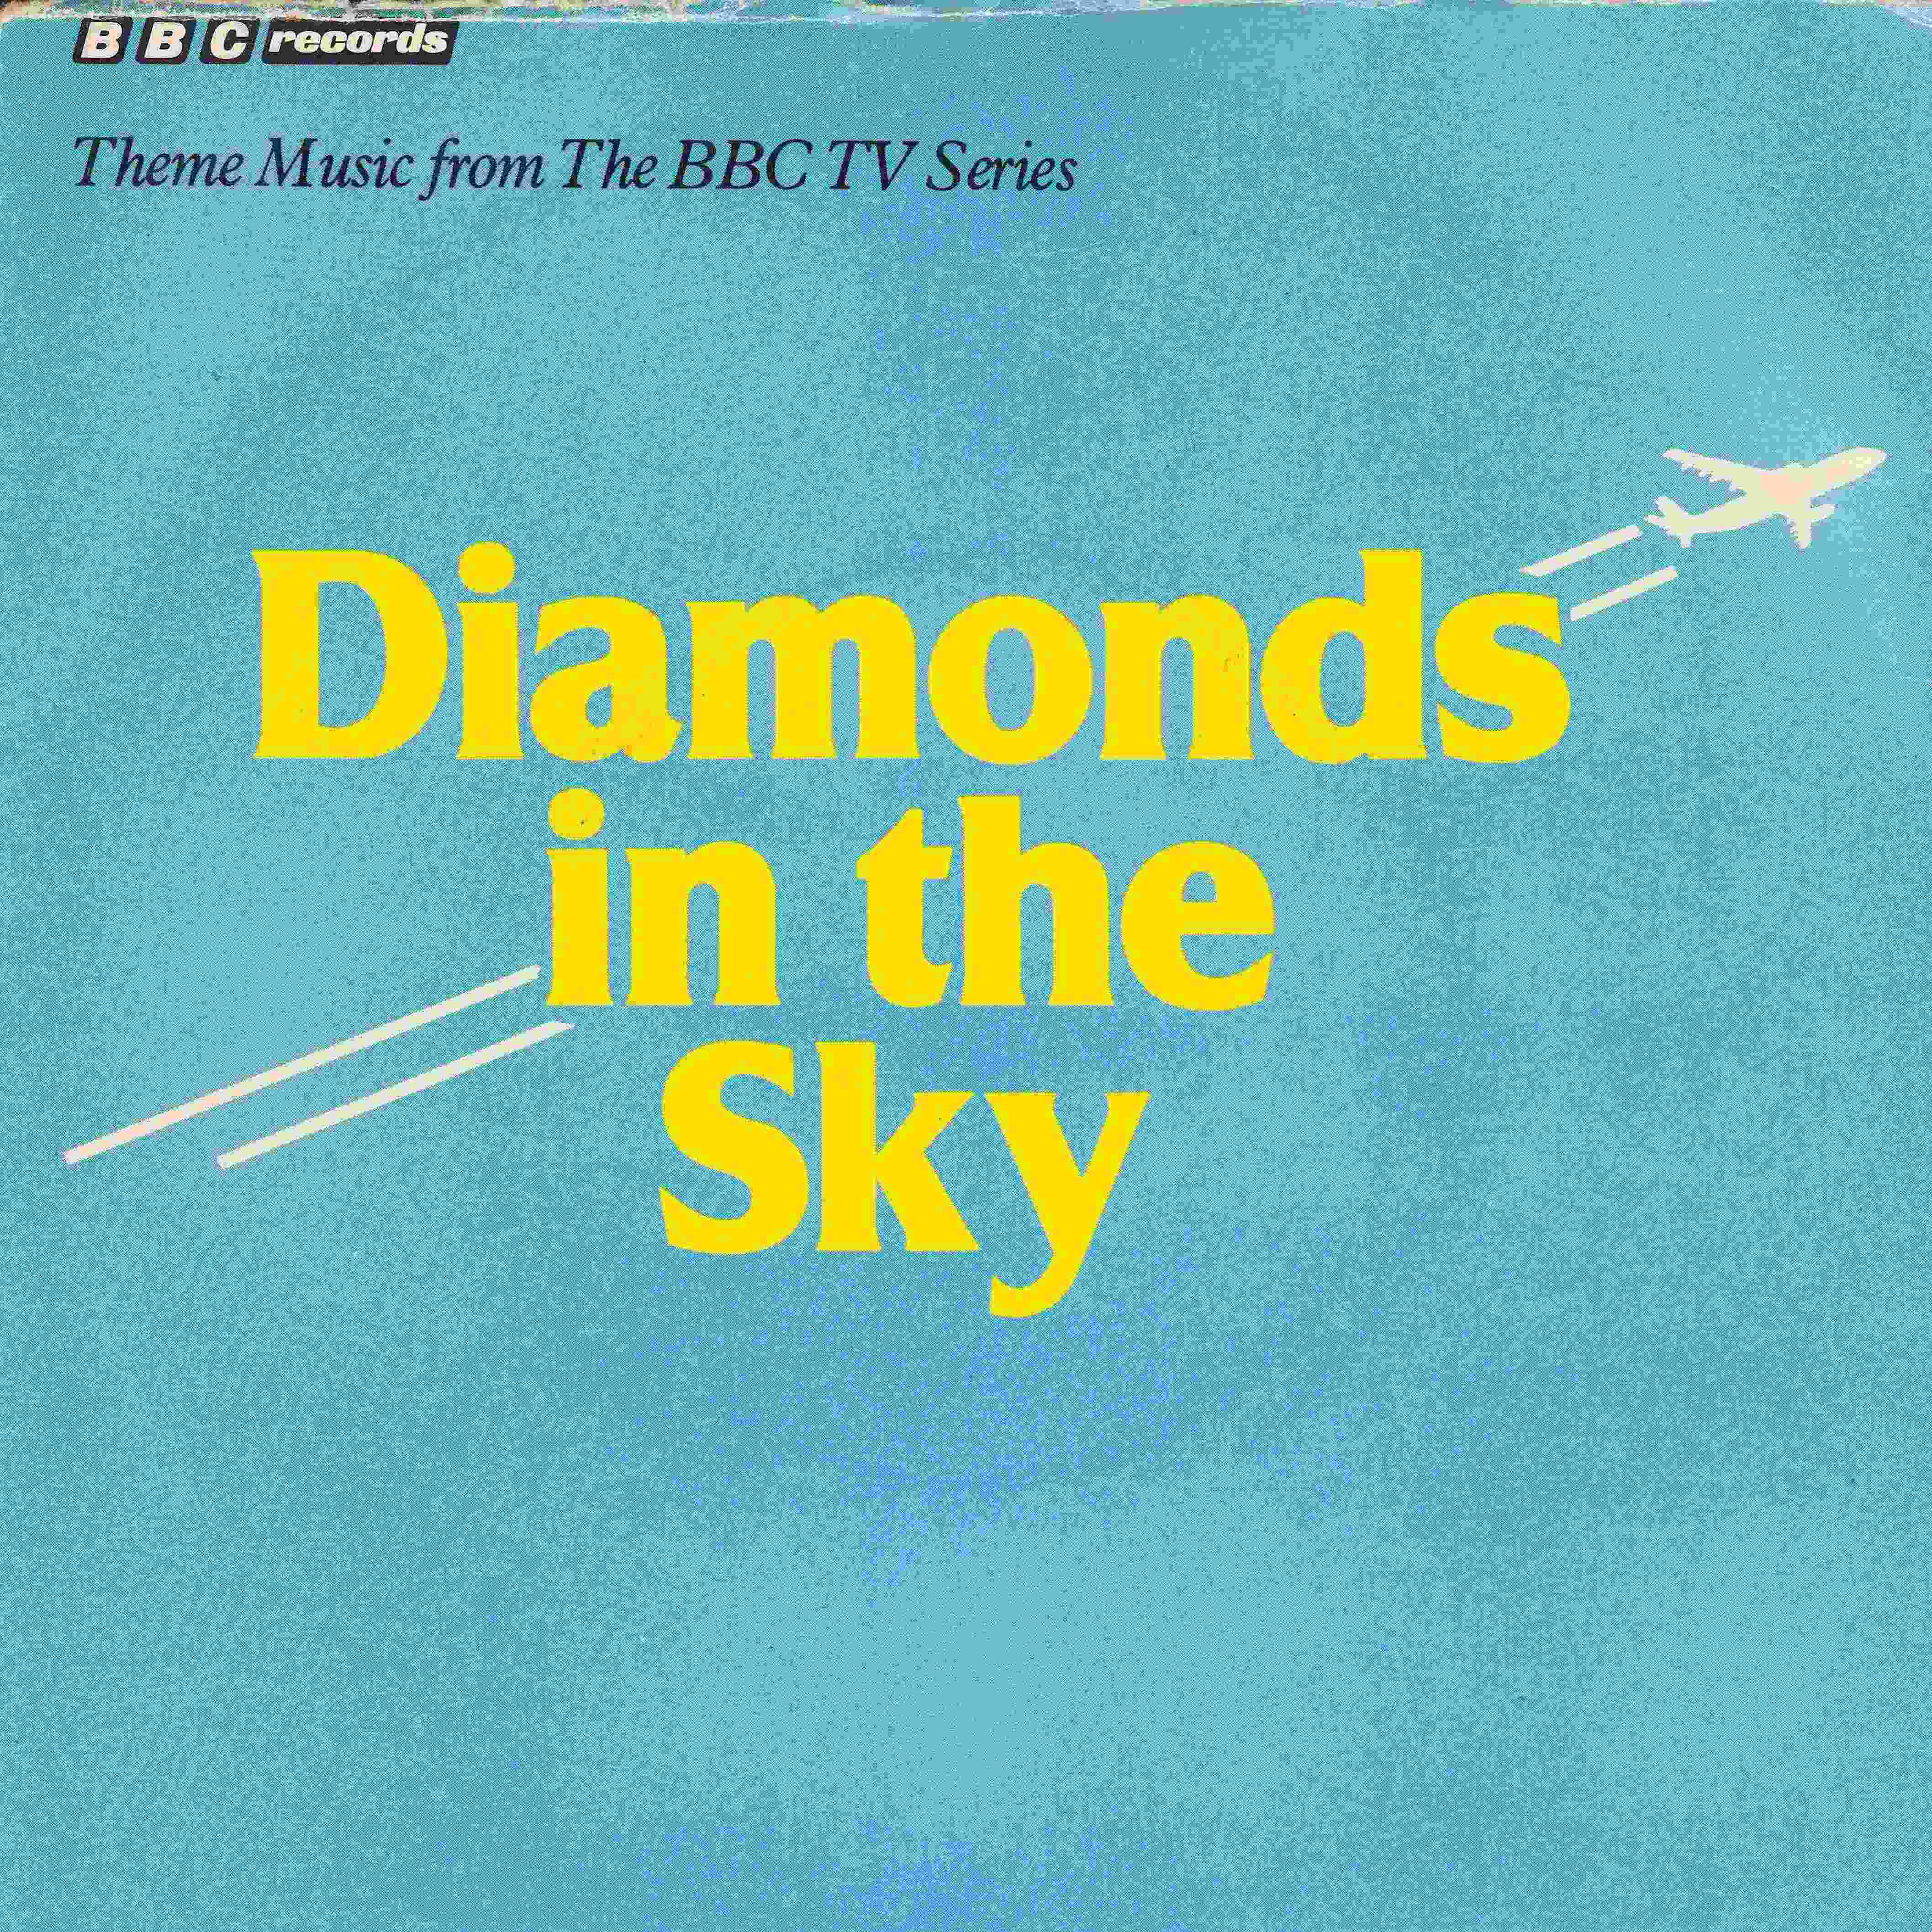 Picture of Diamonds in the sky by artist Richard Denton / Martin Cook from the BBC singles - Records and Tapes library